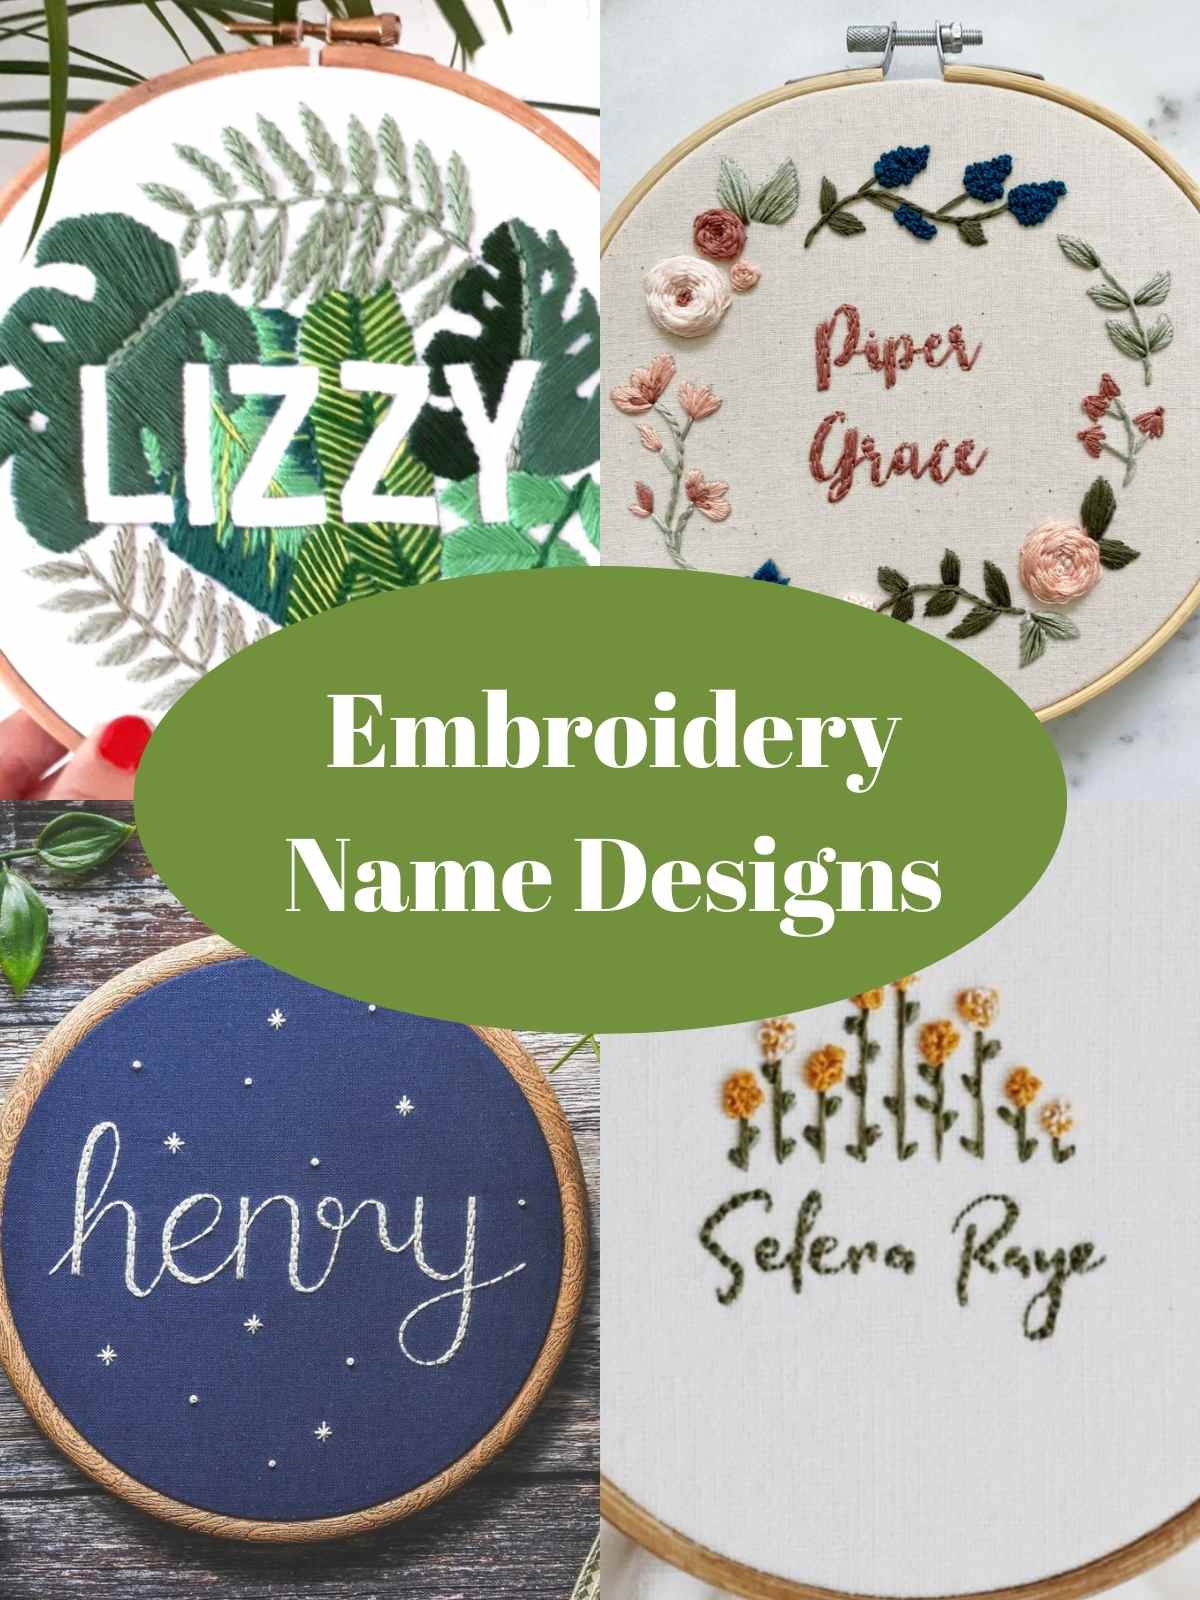 Embroidery Designs to use behind names